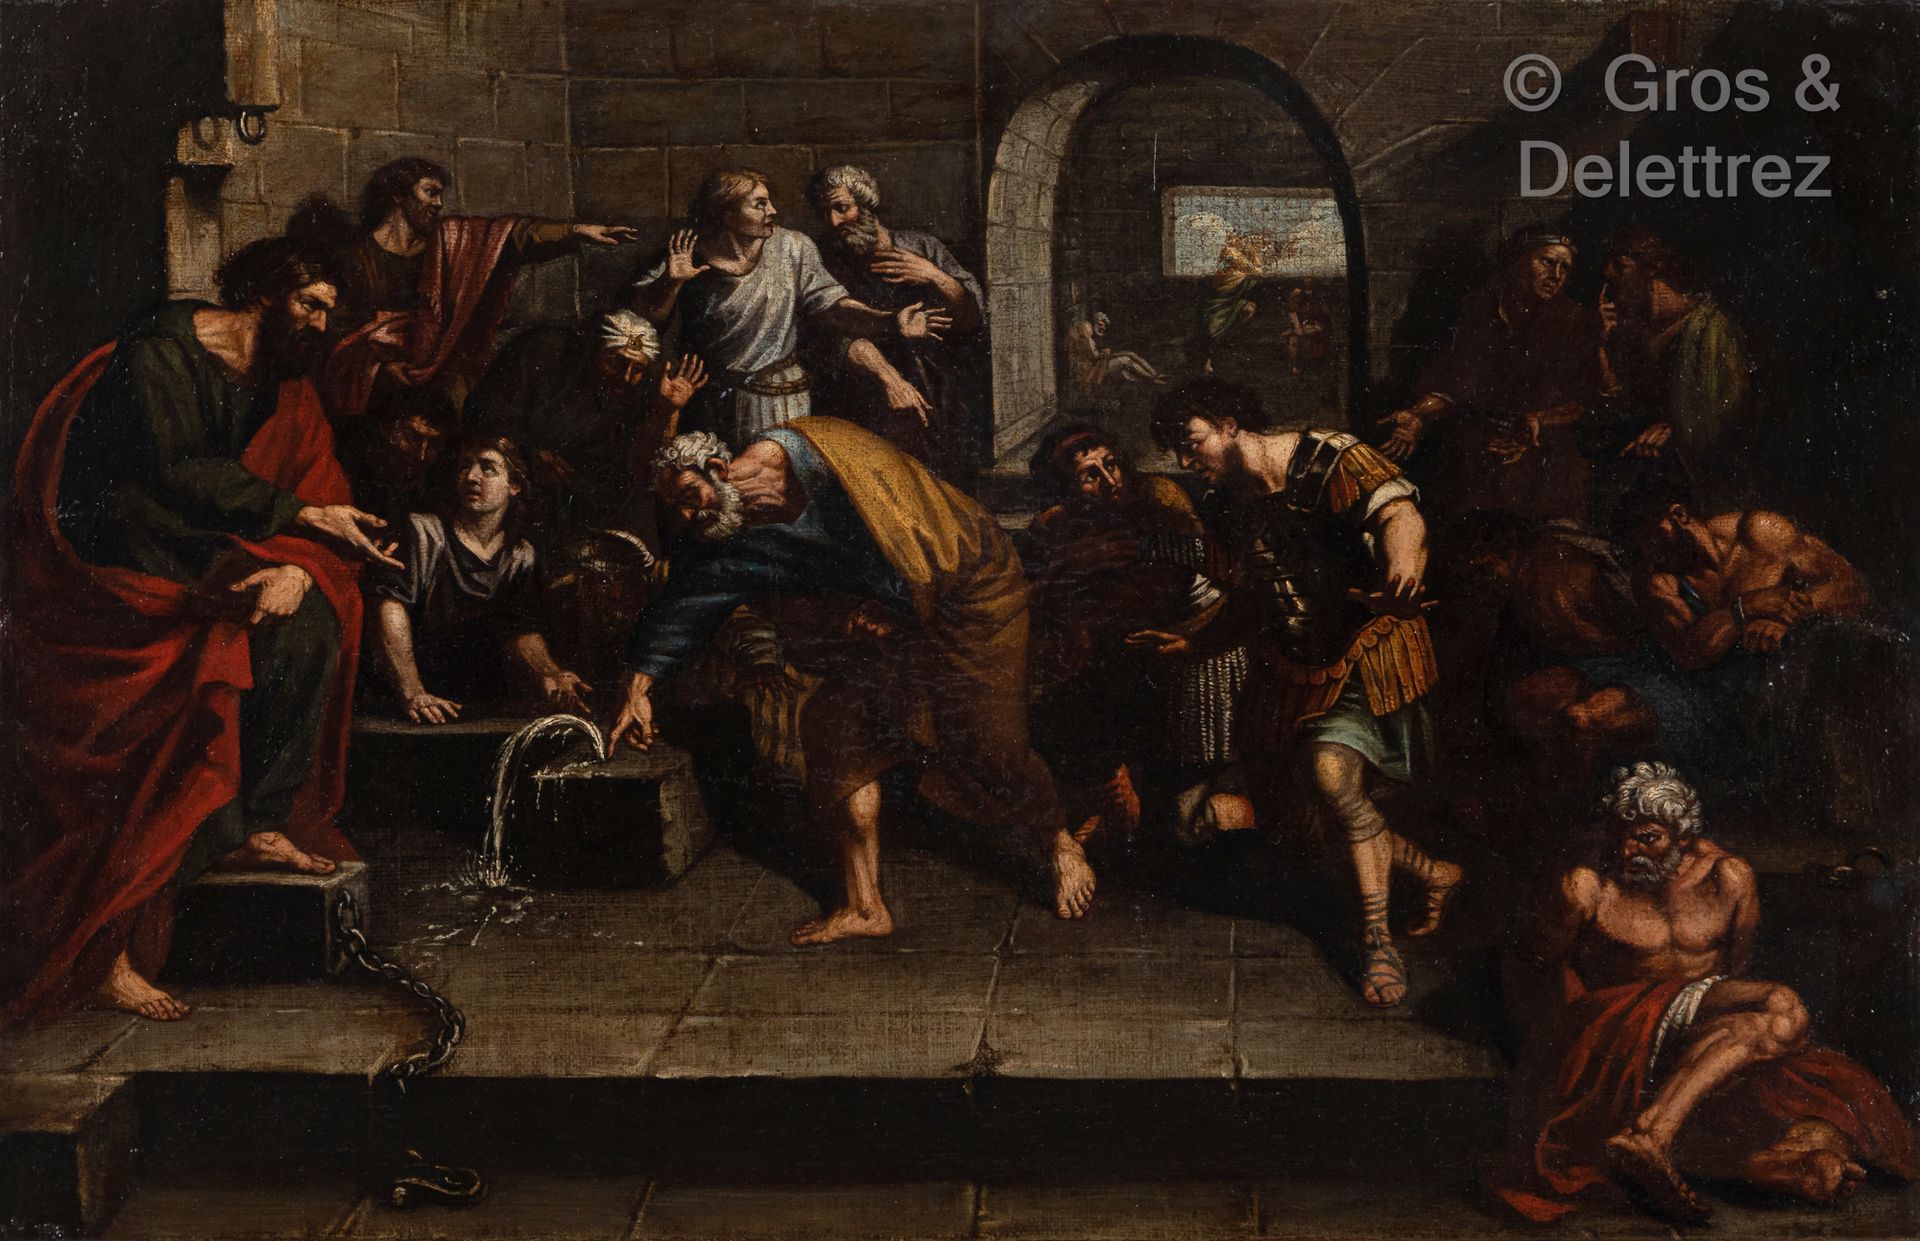 Null Roman school circa 1640
Saint Peter spouting a spring in the gaols
Oil on c&hellip;